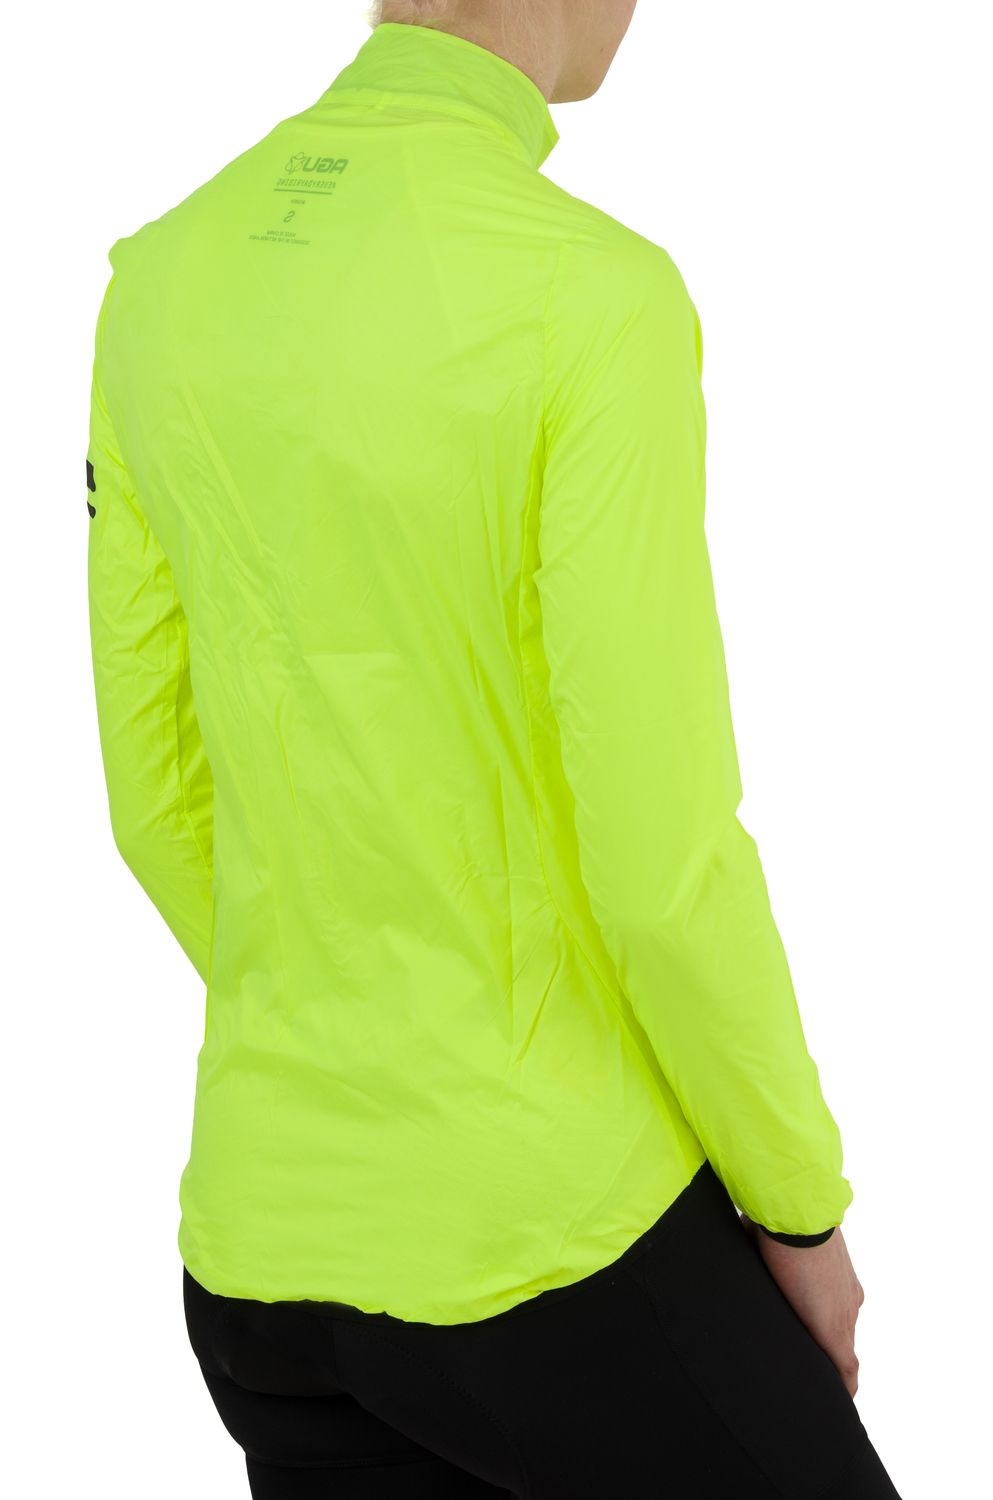 Wind Jacket Essential Women fit example